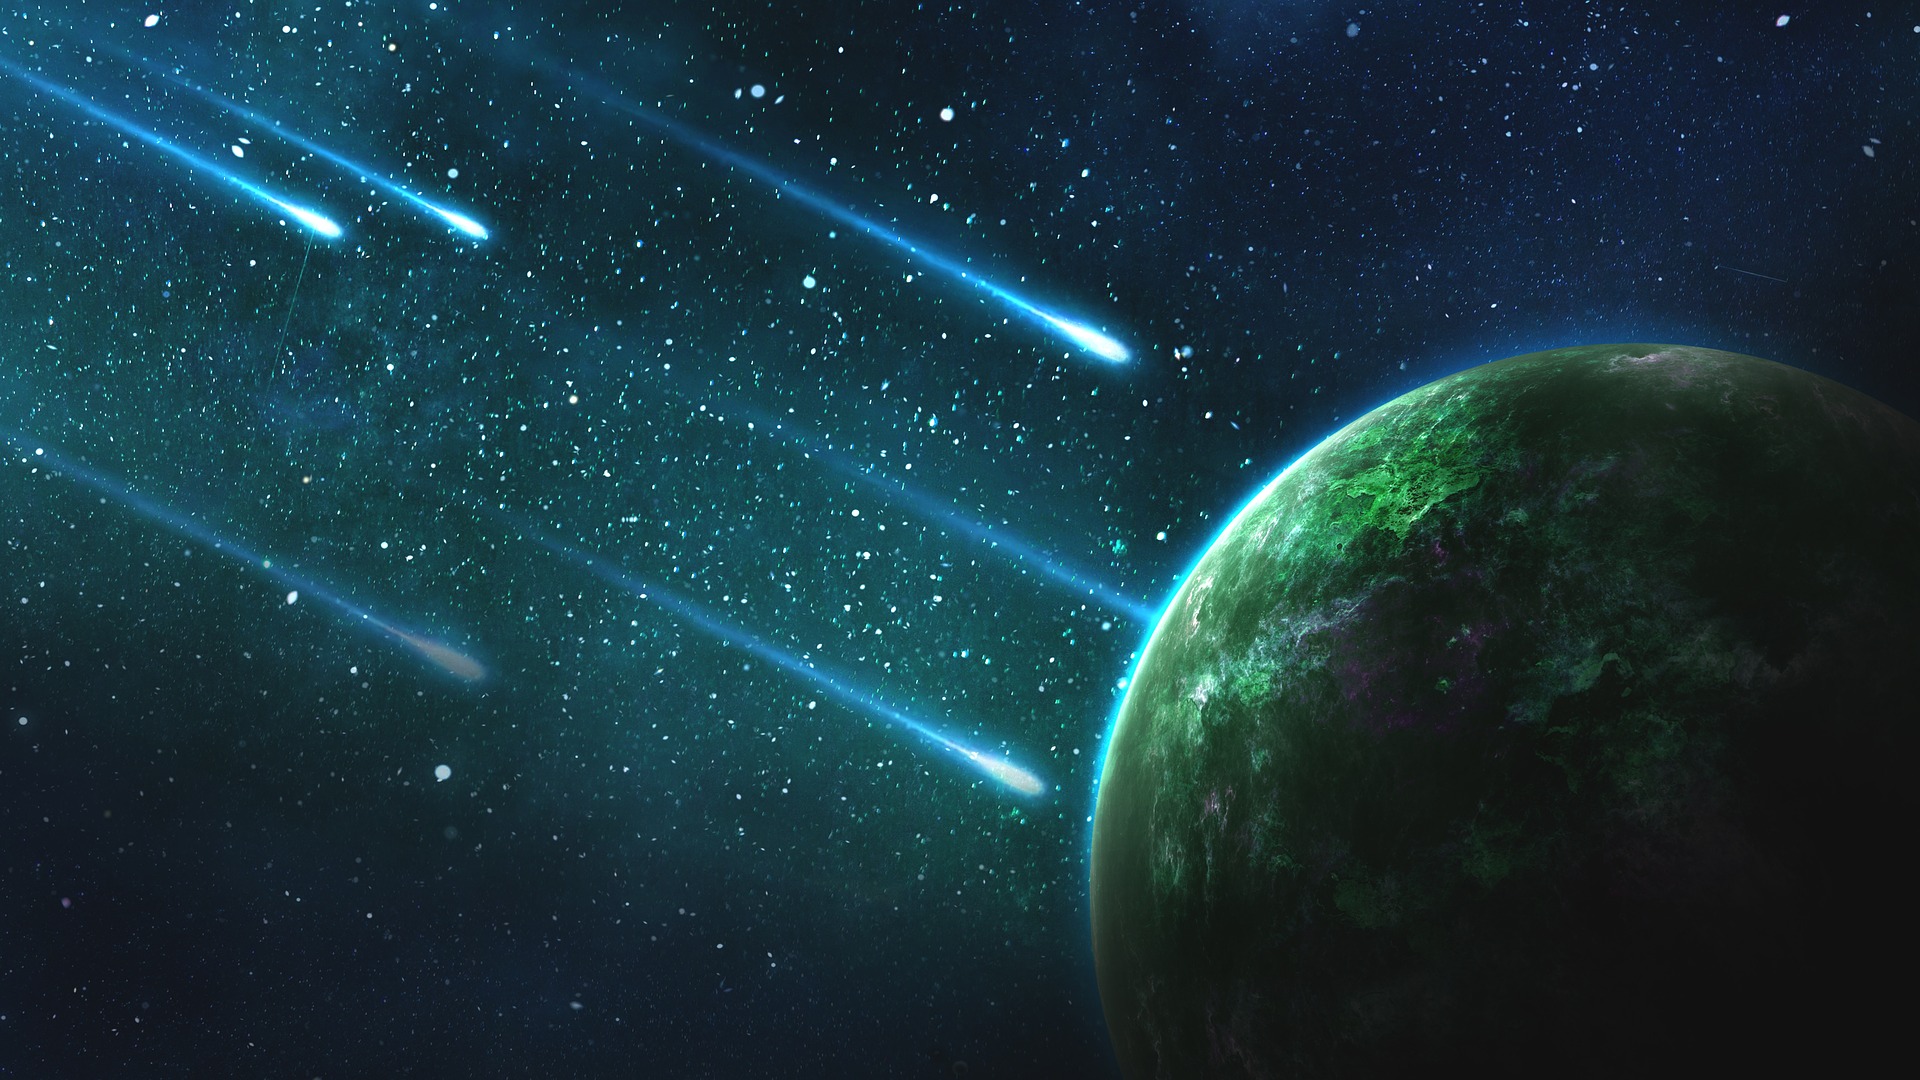 Comets-space-blue-green-planet-free-domain.jpg